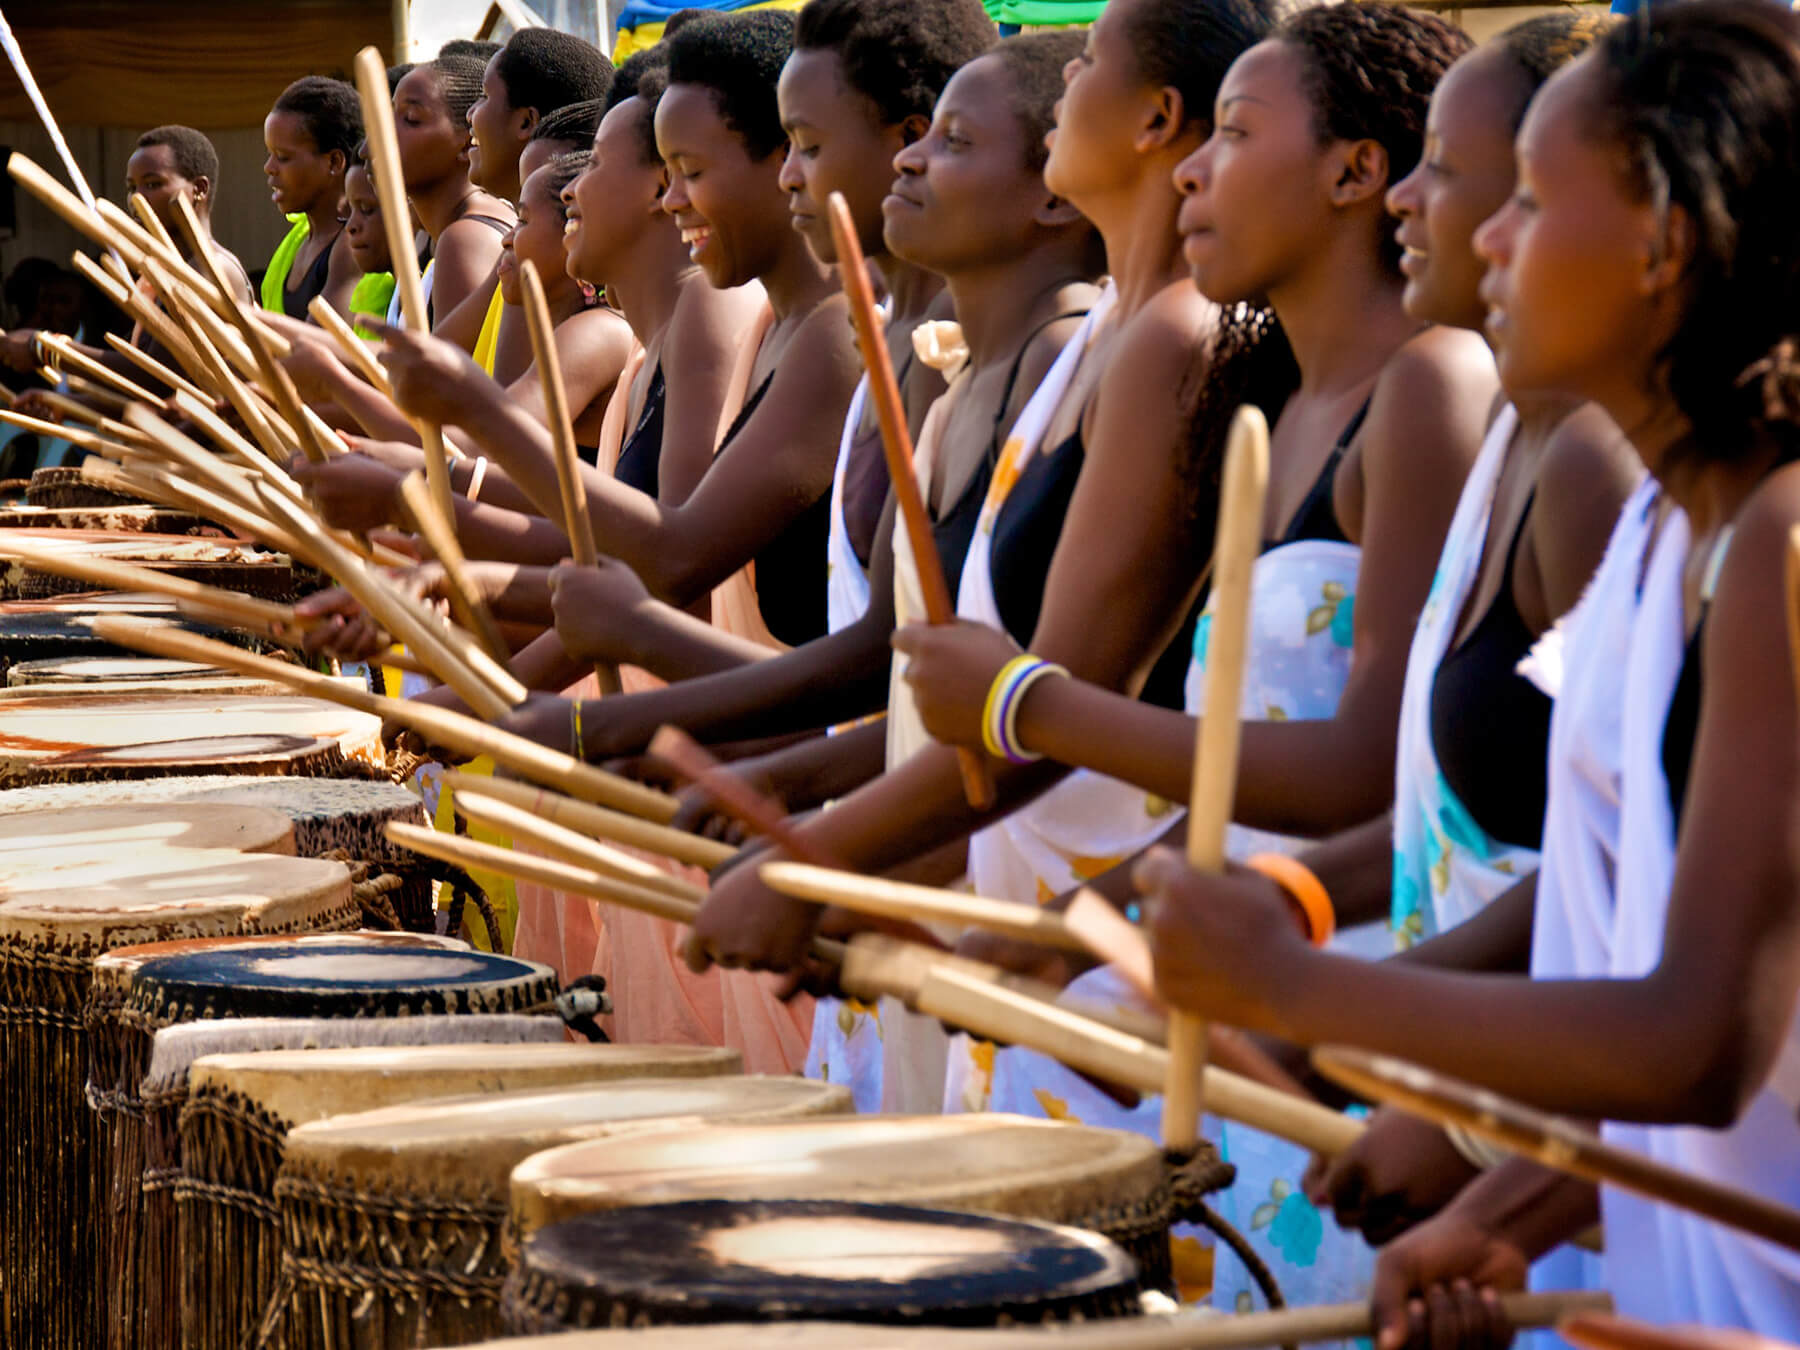 A line of women holding drumsticks, arms bent, mid drum-strike over stomach-height wooden drums stretches from the foreground into the background. All of the women are wearing black tank tops and a patterned one-shoulder wrap overtop.